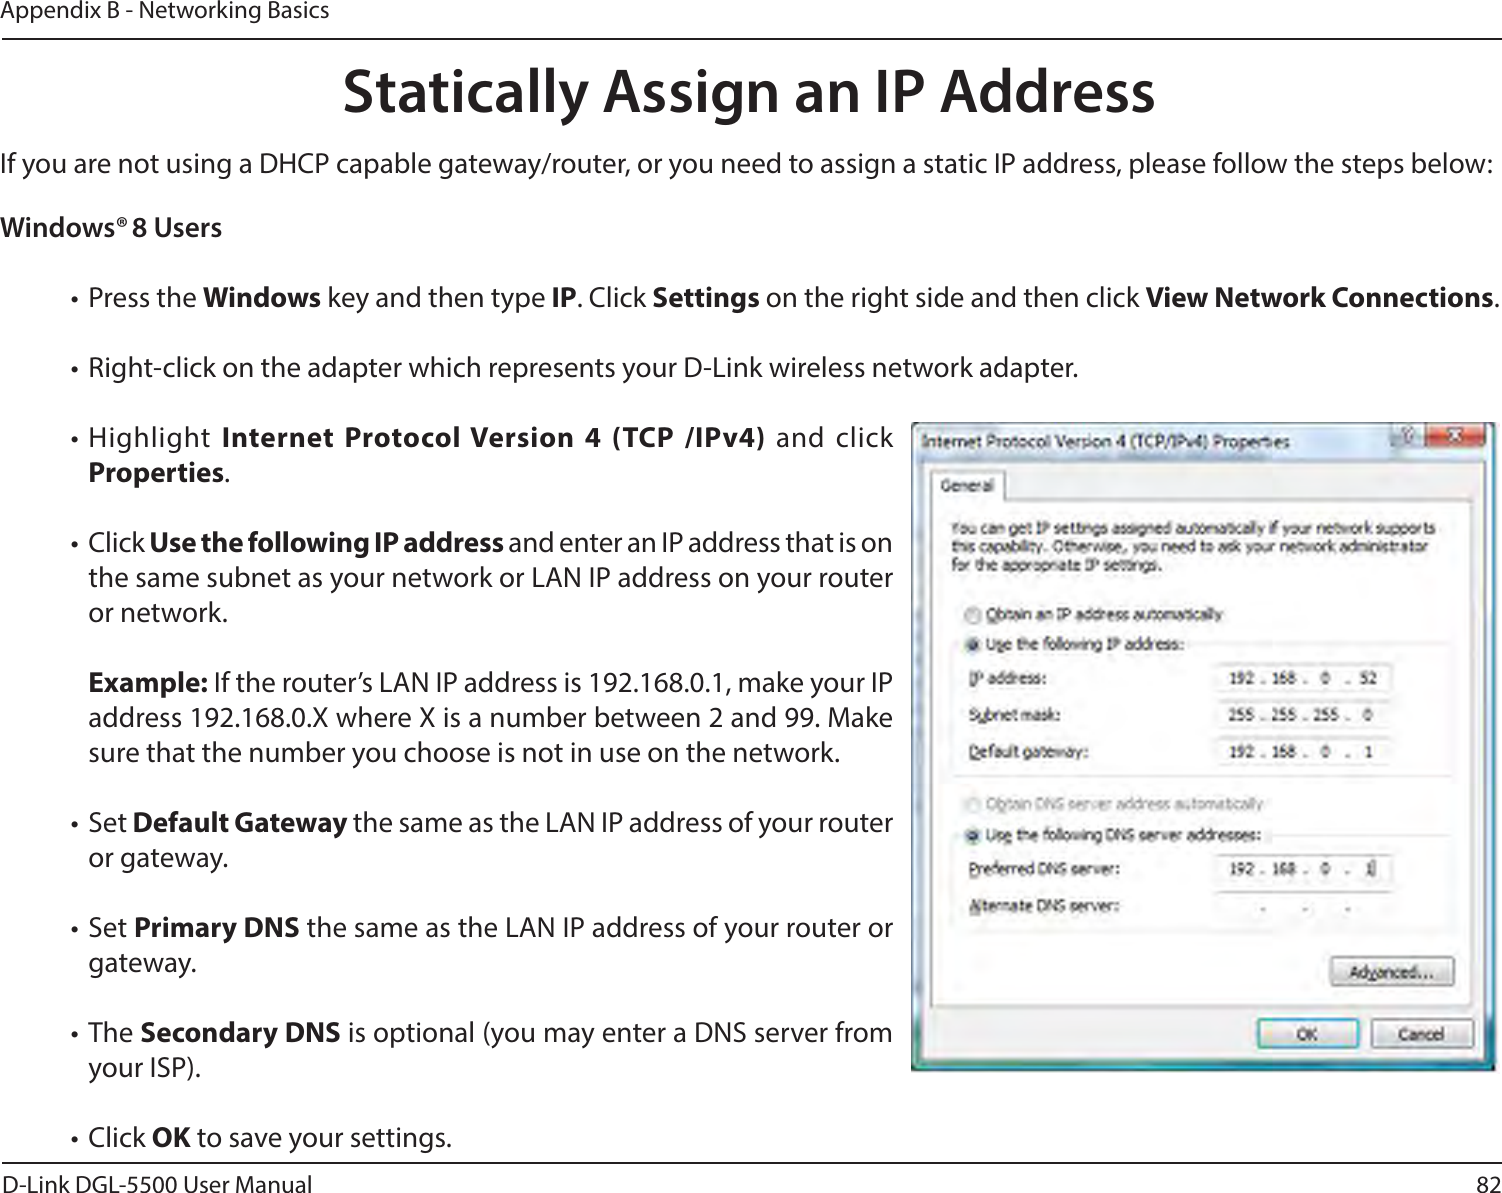 82D-Link DGL-5500 User ManualAppendix B - Networking BasicsWindows® 8 Users•  Press the Windows key and then type IP. Click Settings on the right side and then click View Network Connections. • Right-click on the adapter which represents your D-Link wireless network adapter.• Highlight Internet Protocol Version 4 (TCP /IPv4) and click Properties.• Click Use the following IP address and enter an IP address that is on the same subnet as your network or LAN IP address on your router or network. Example: If the router’s LAN IP address is 192.168.0.1, make your IP address 192.168.0.X where X is a number between 2 and 99. Make sure that the number you choose is not in use on the network. • Set Default Gateway the same as the LAN IP address of your router or gateway.• Set Primary DNS the same as the LAN IP address of your router or gateway. • The Secondary DNS is optional (you may enter a DNS server from your ISP).• Click OK to save your settings.Statically Assign an IP AddressIf you are not using a DHCP capable gateway/router, or you need to assign a static IP address, please follow the steps below: